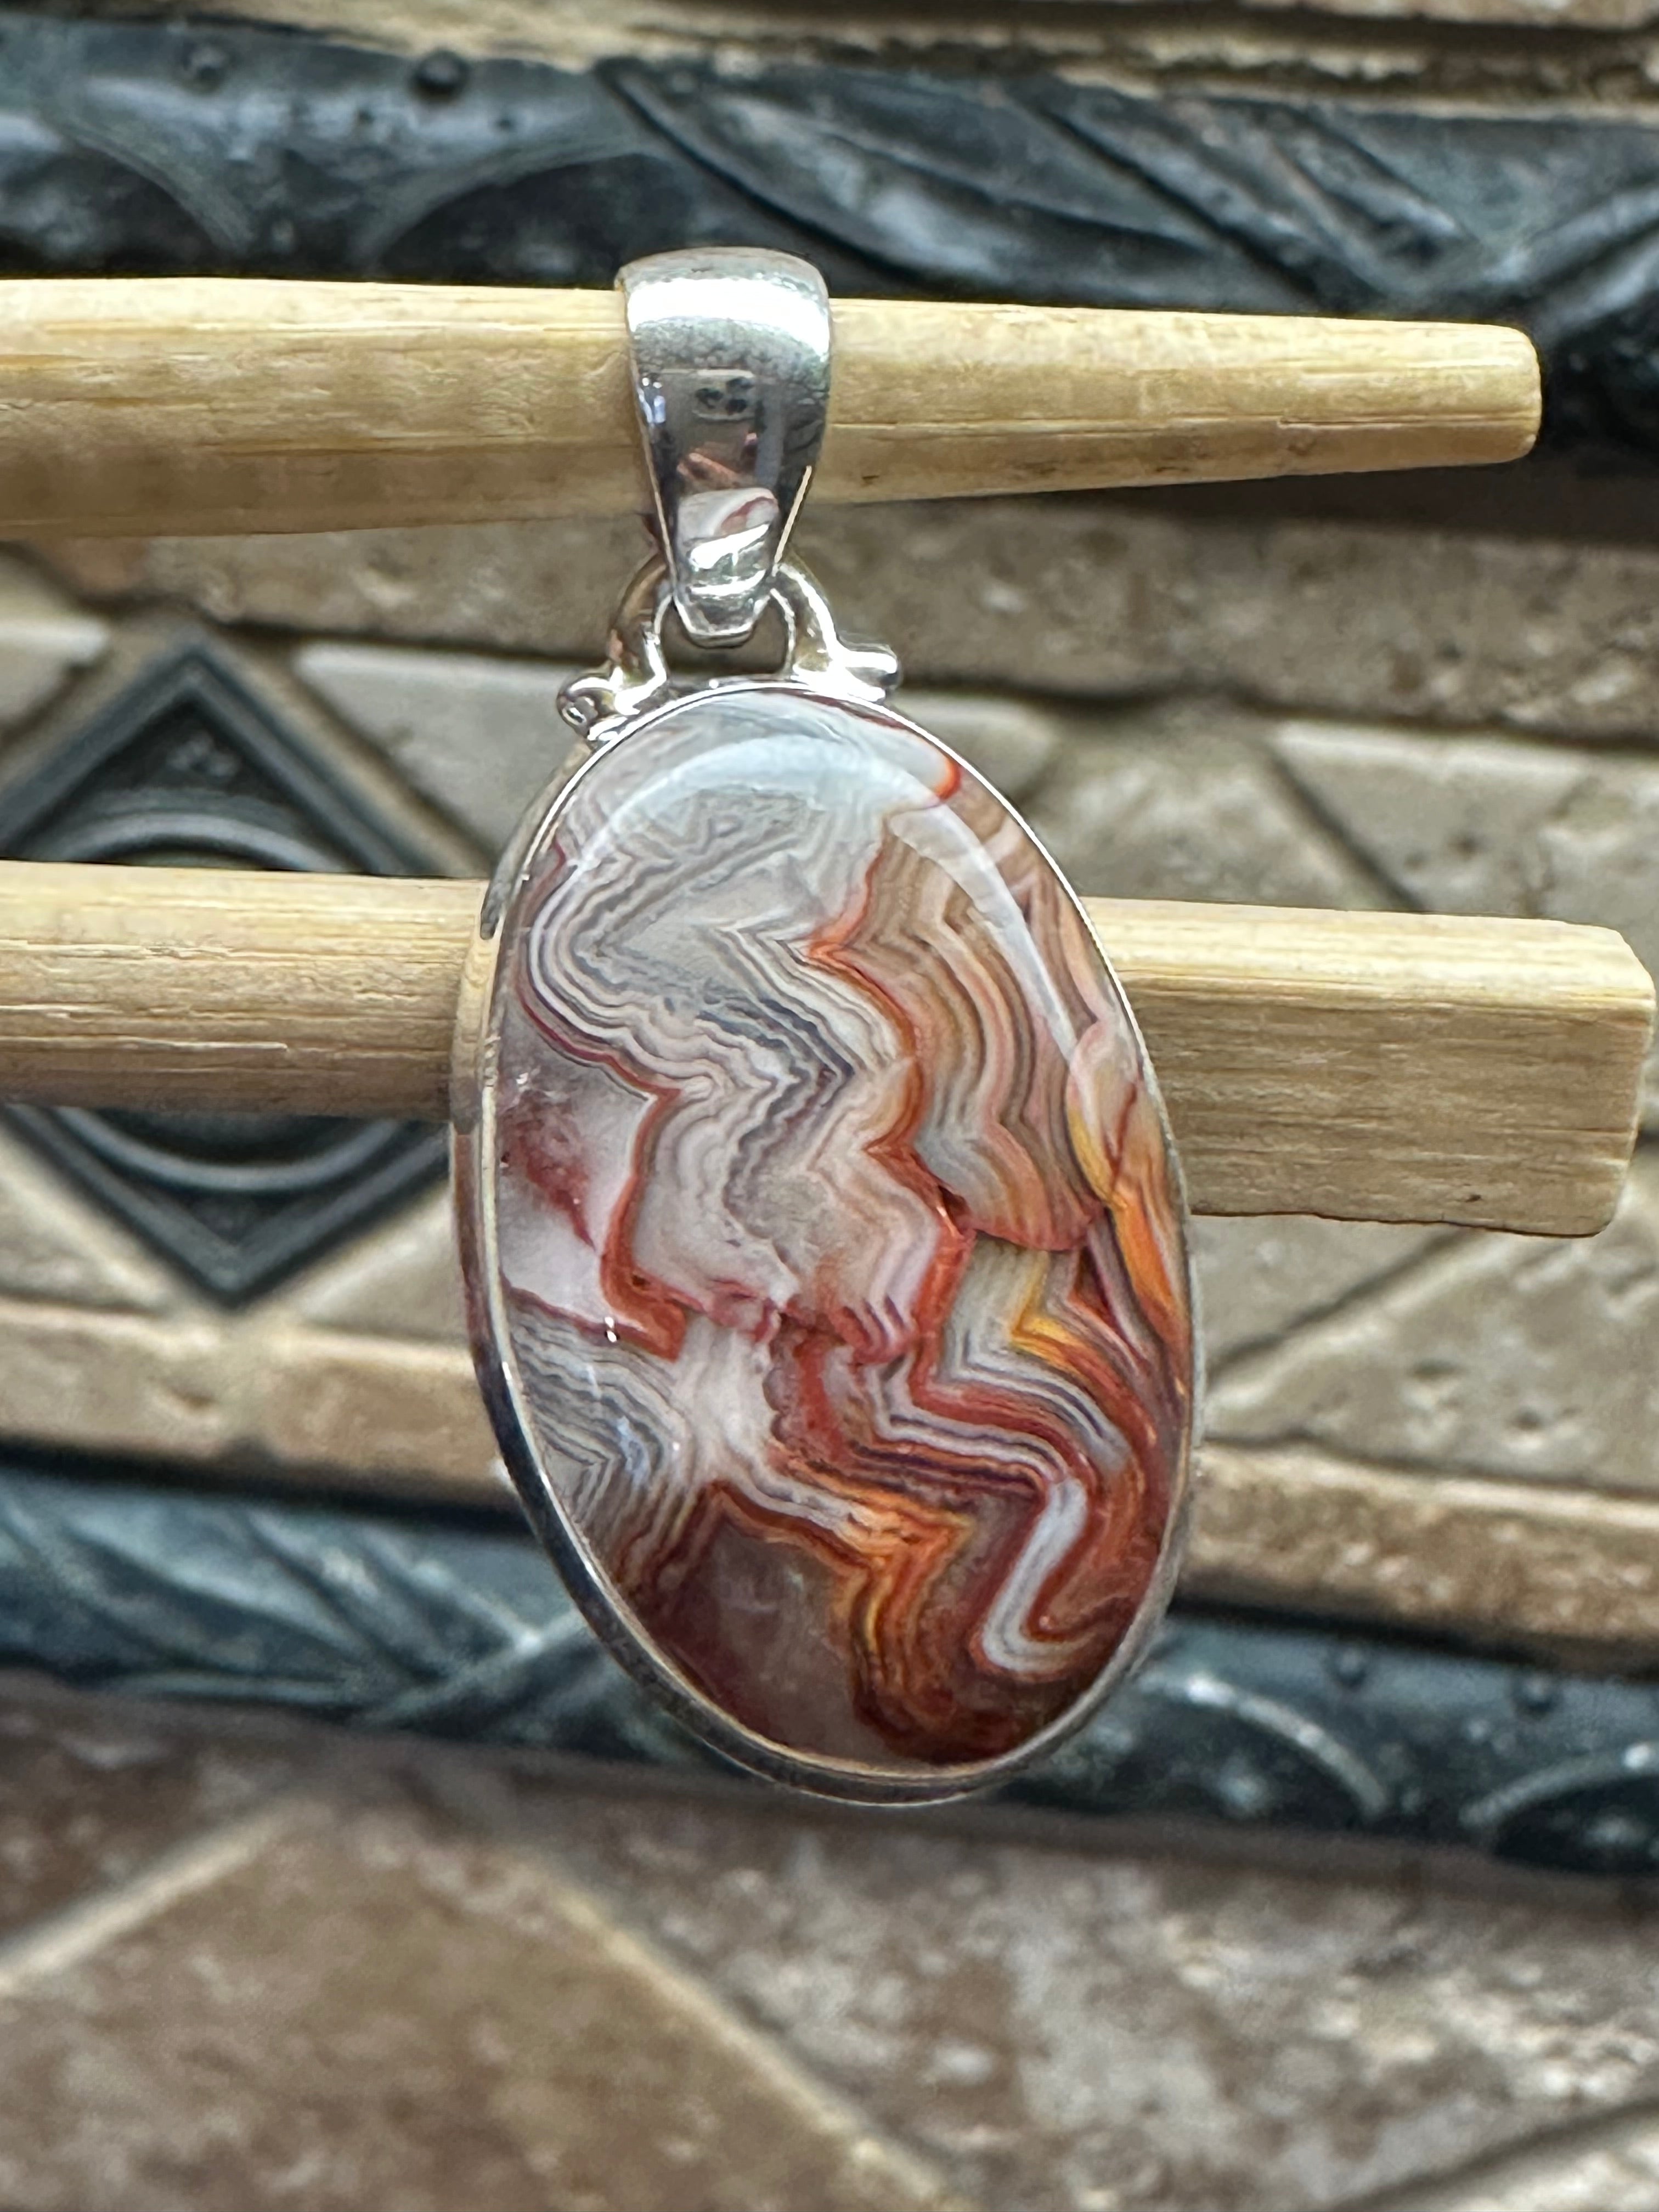 Natural Laguna Lace agate 925 Solid Sterling Silver Pendant 40mm